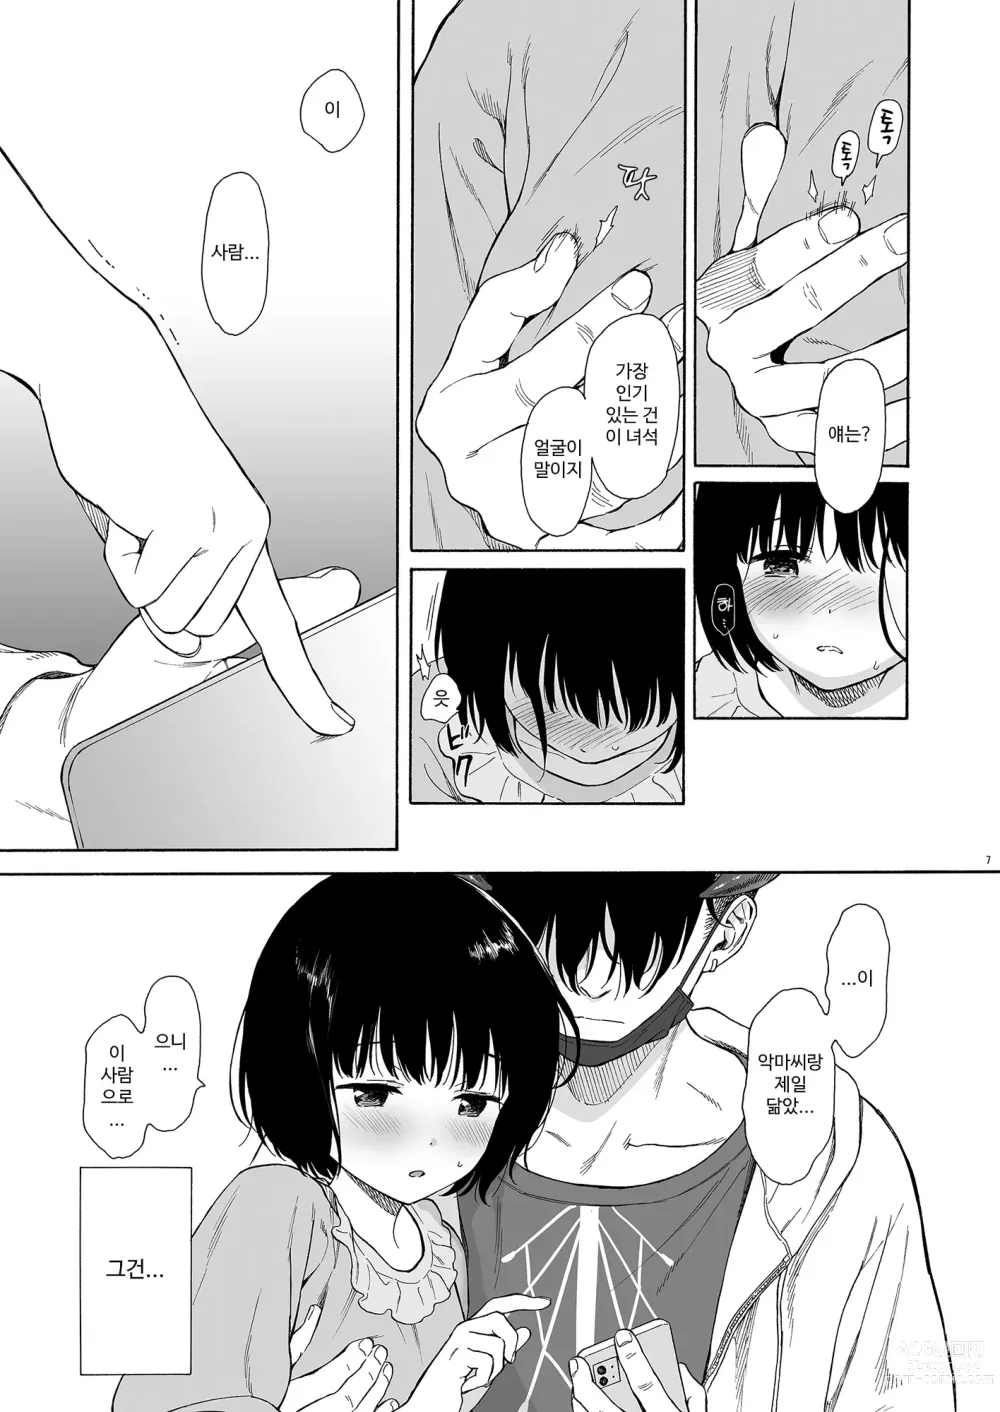 Page 7 of doujinshi 심야의 침입자